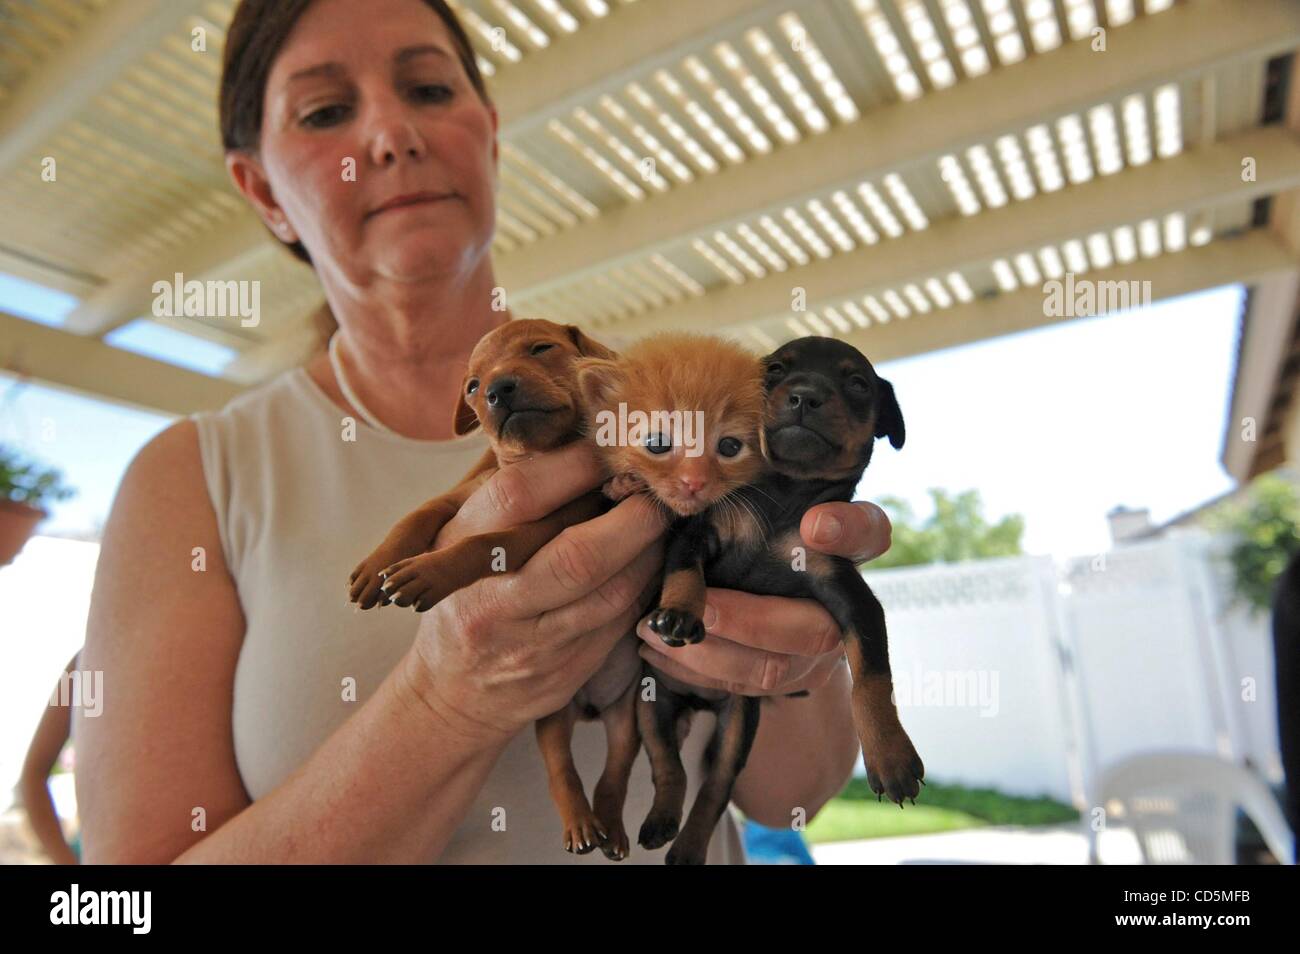 Aug 22, 2008 - Norco, California, U.S. - Dog owner SHERRY HAYNES holds two baby miniature pinschers and a 3 week old kitten. Jasmine, a miniature pinscher, gave birth to four puppies but was also the proud mother of four kittens after the mother cat failed to return and care for her young. The owner Stock Photo